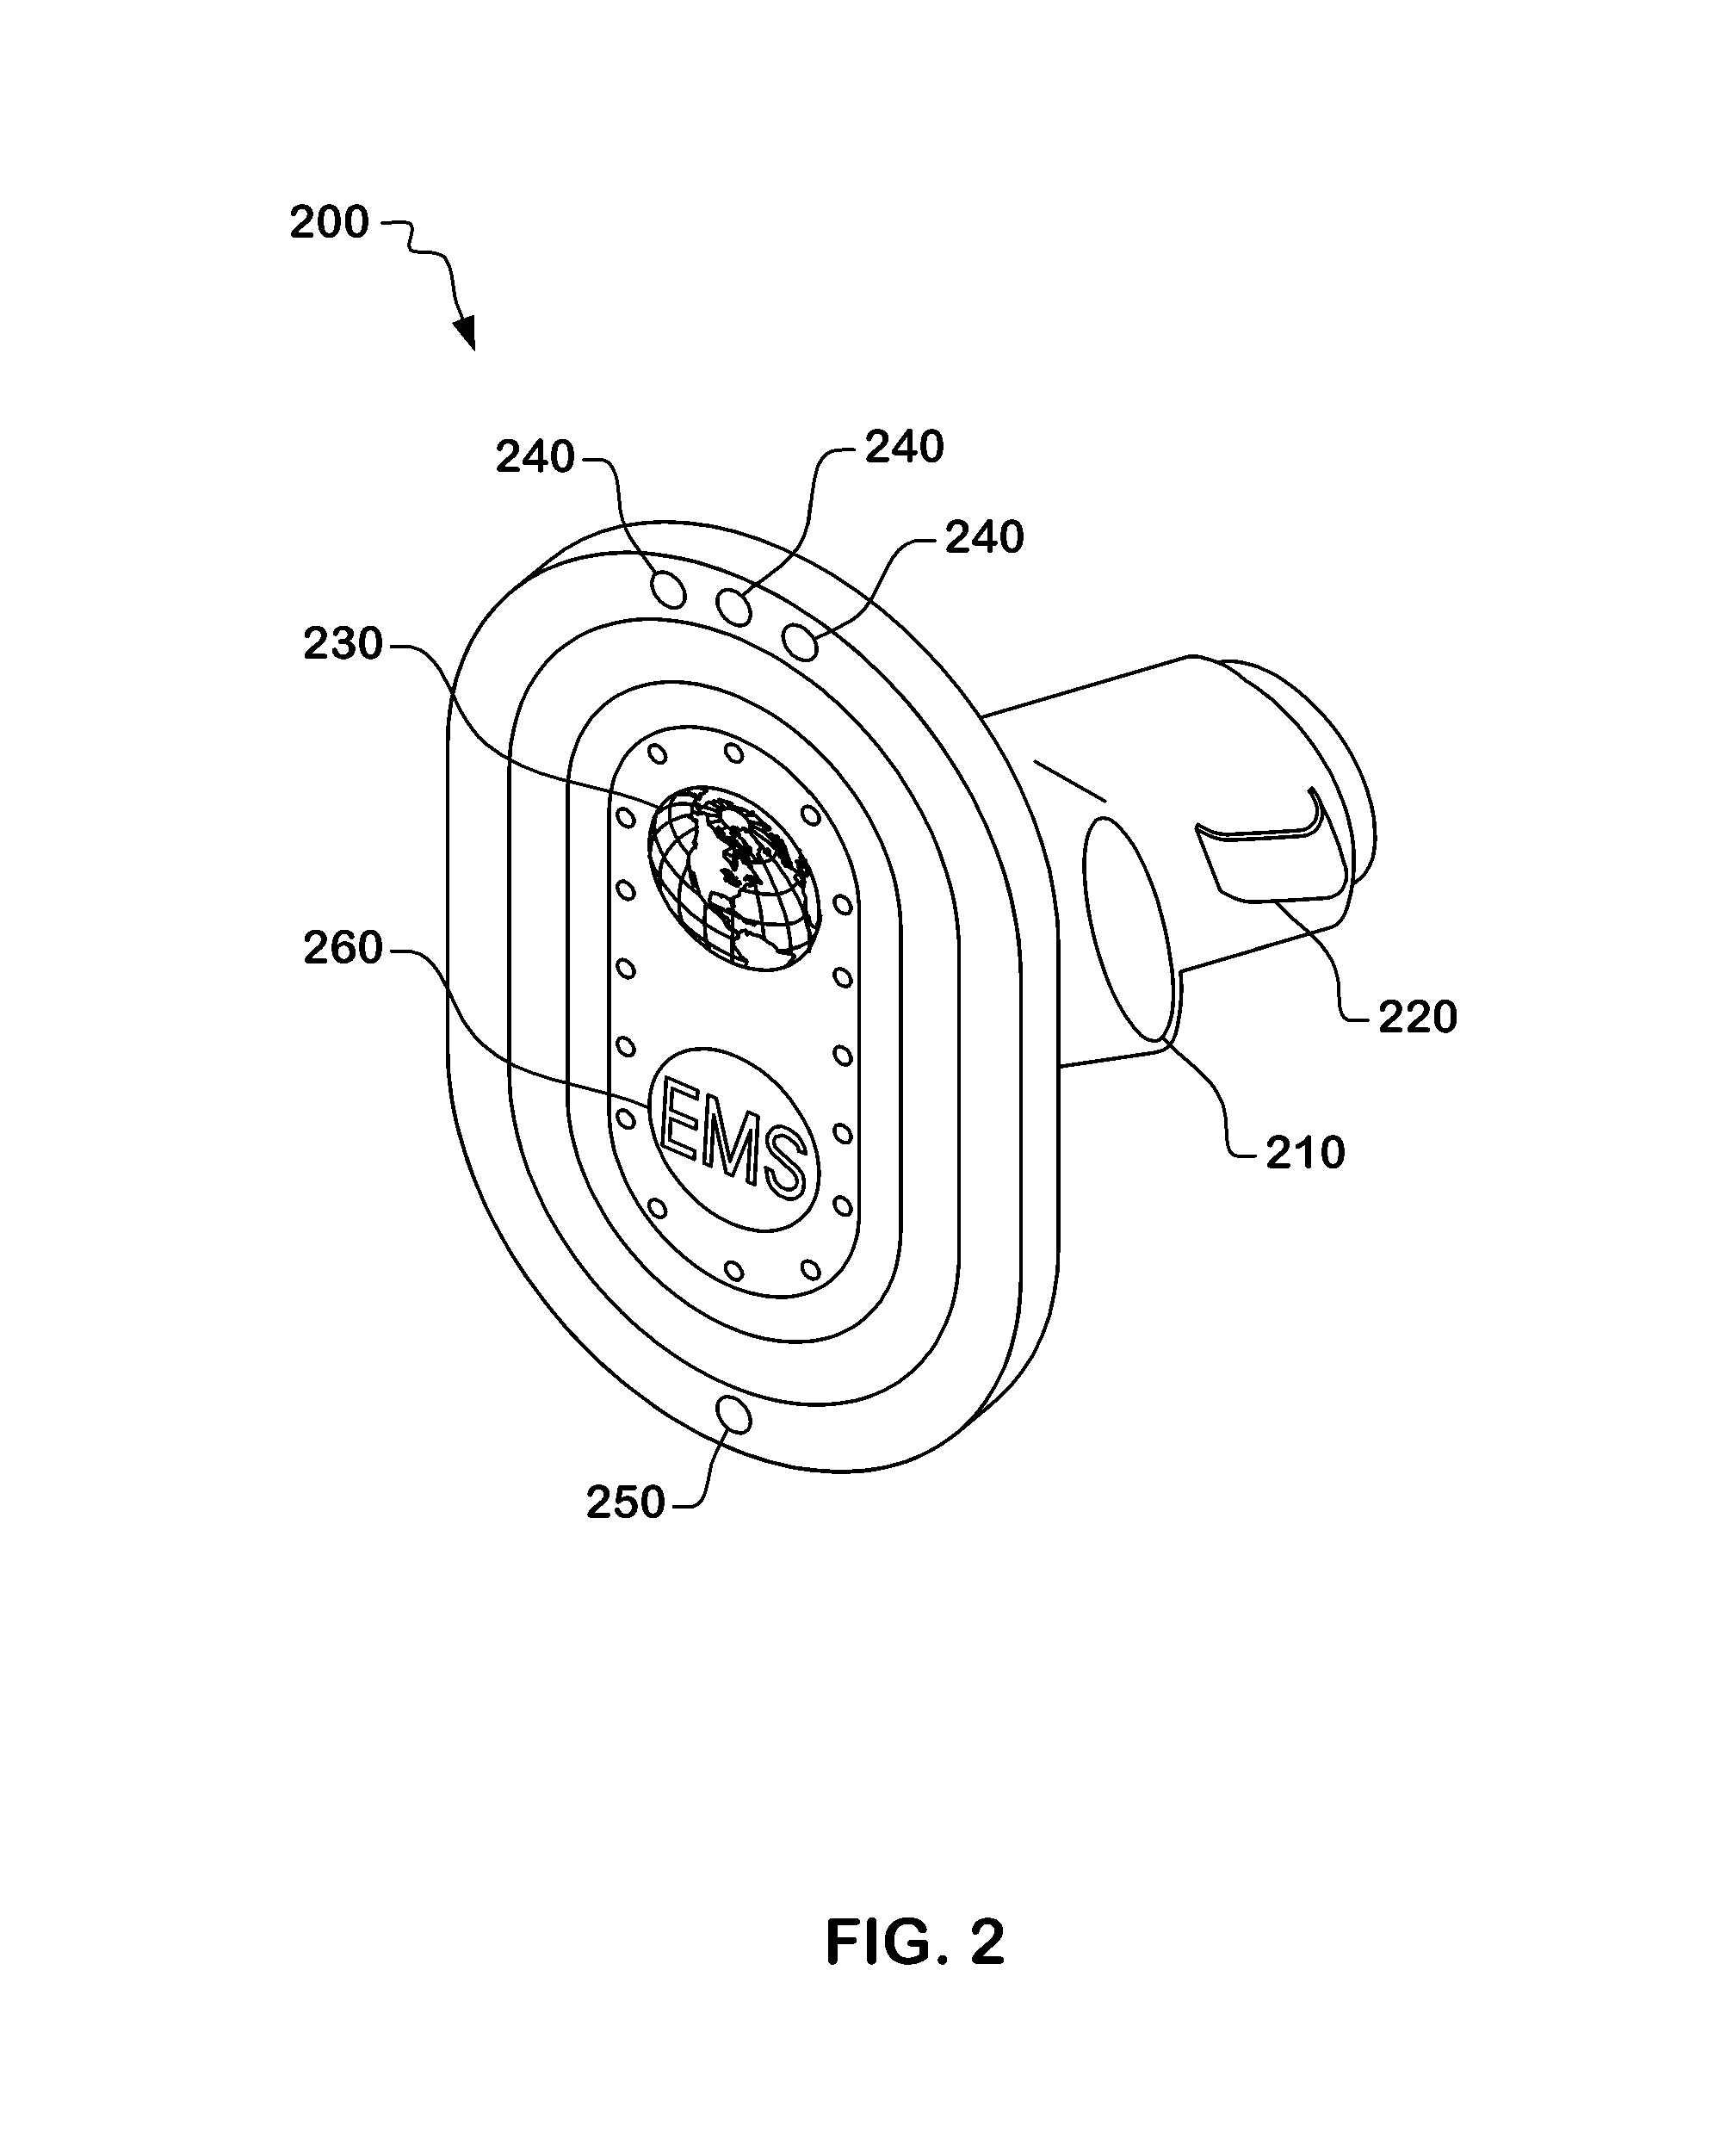 Portable wireless automobile and personal emergency responder and messenger system and method